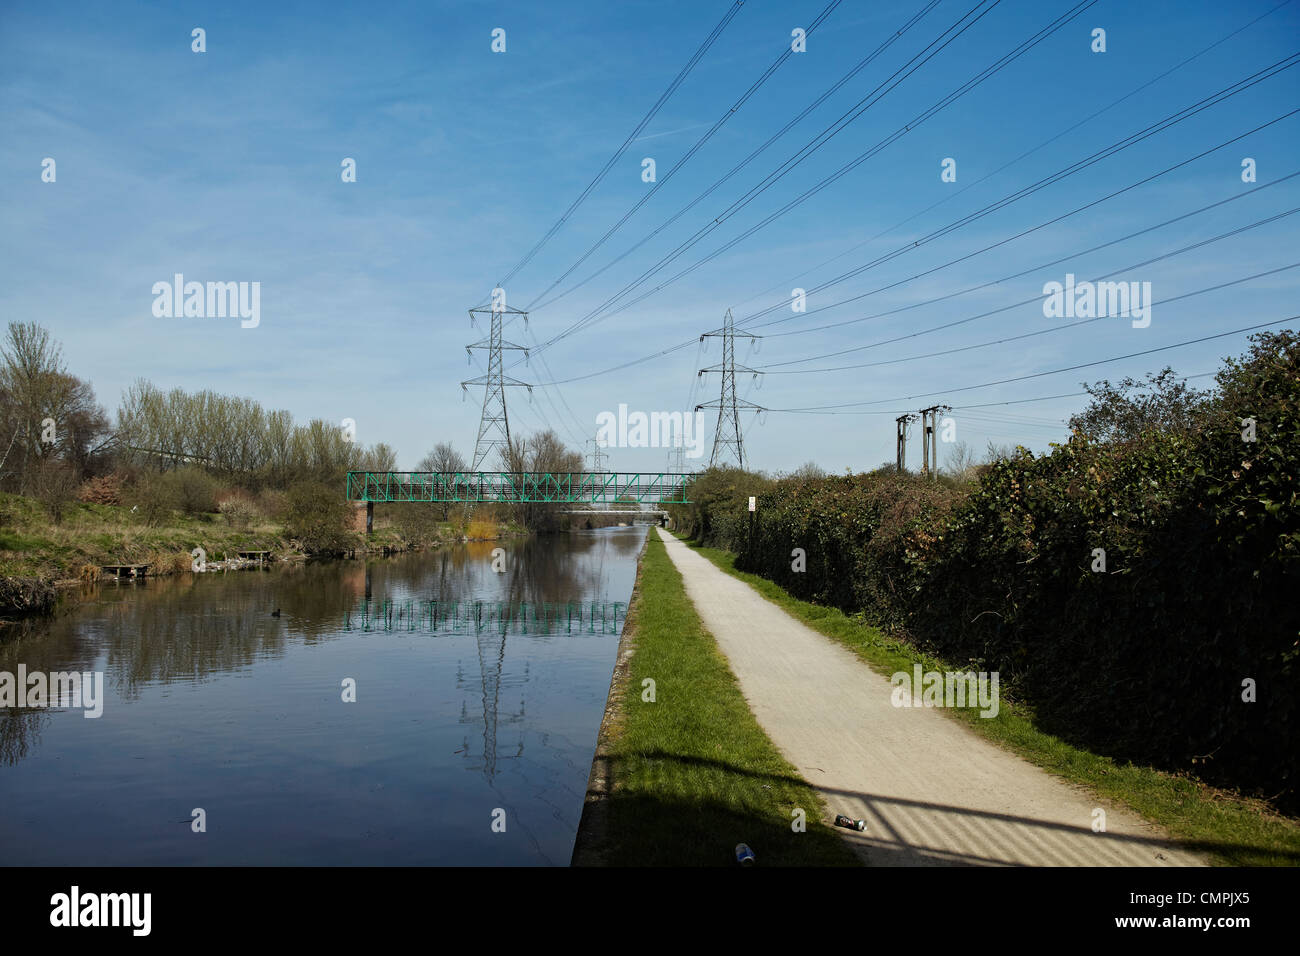 Canal scene with electricity pylons and pipe bridge on a sunny day. Stock Photo